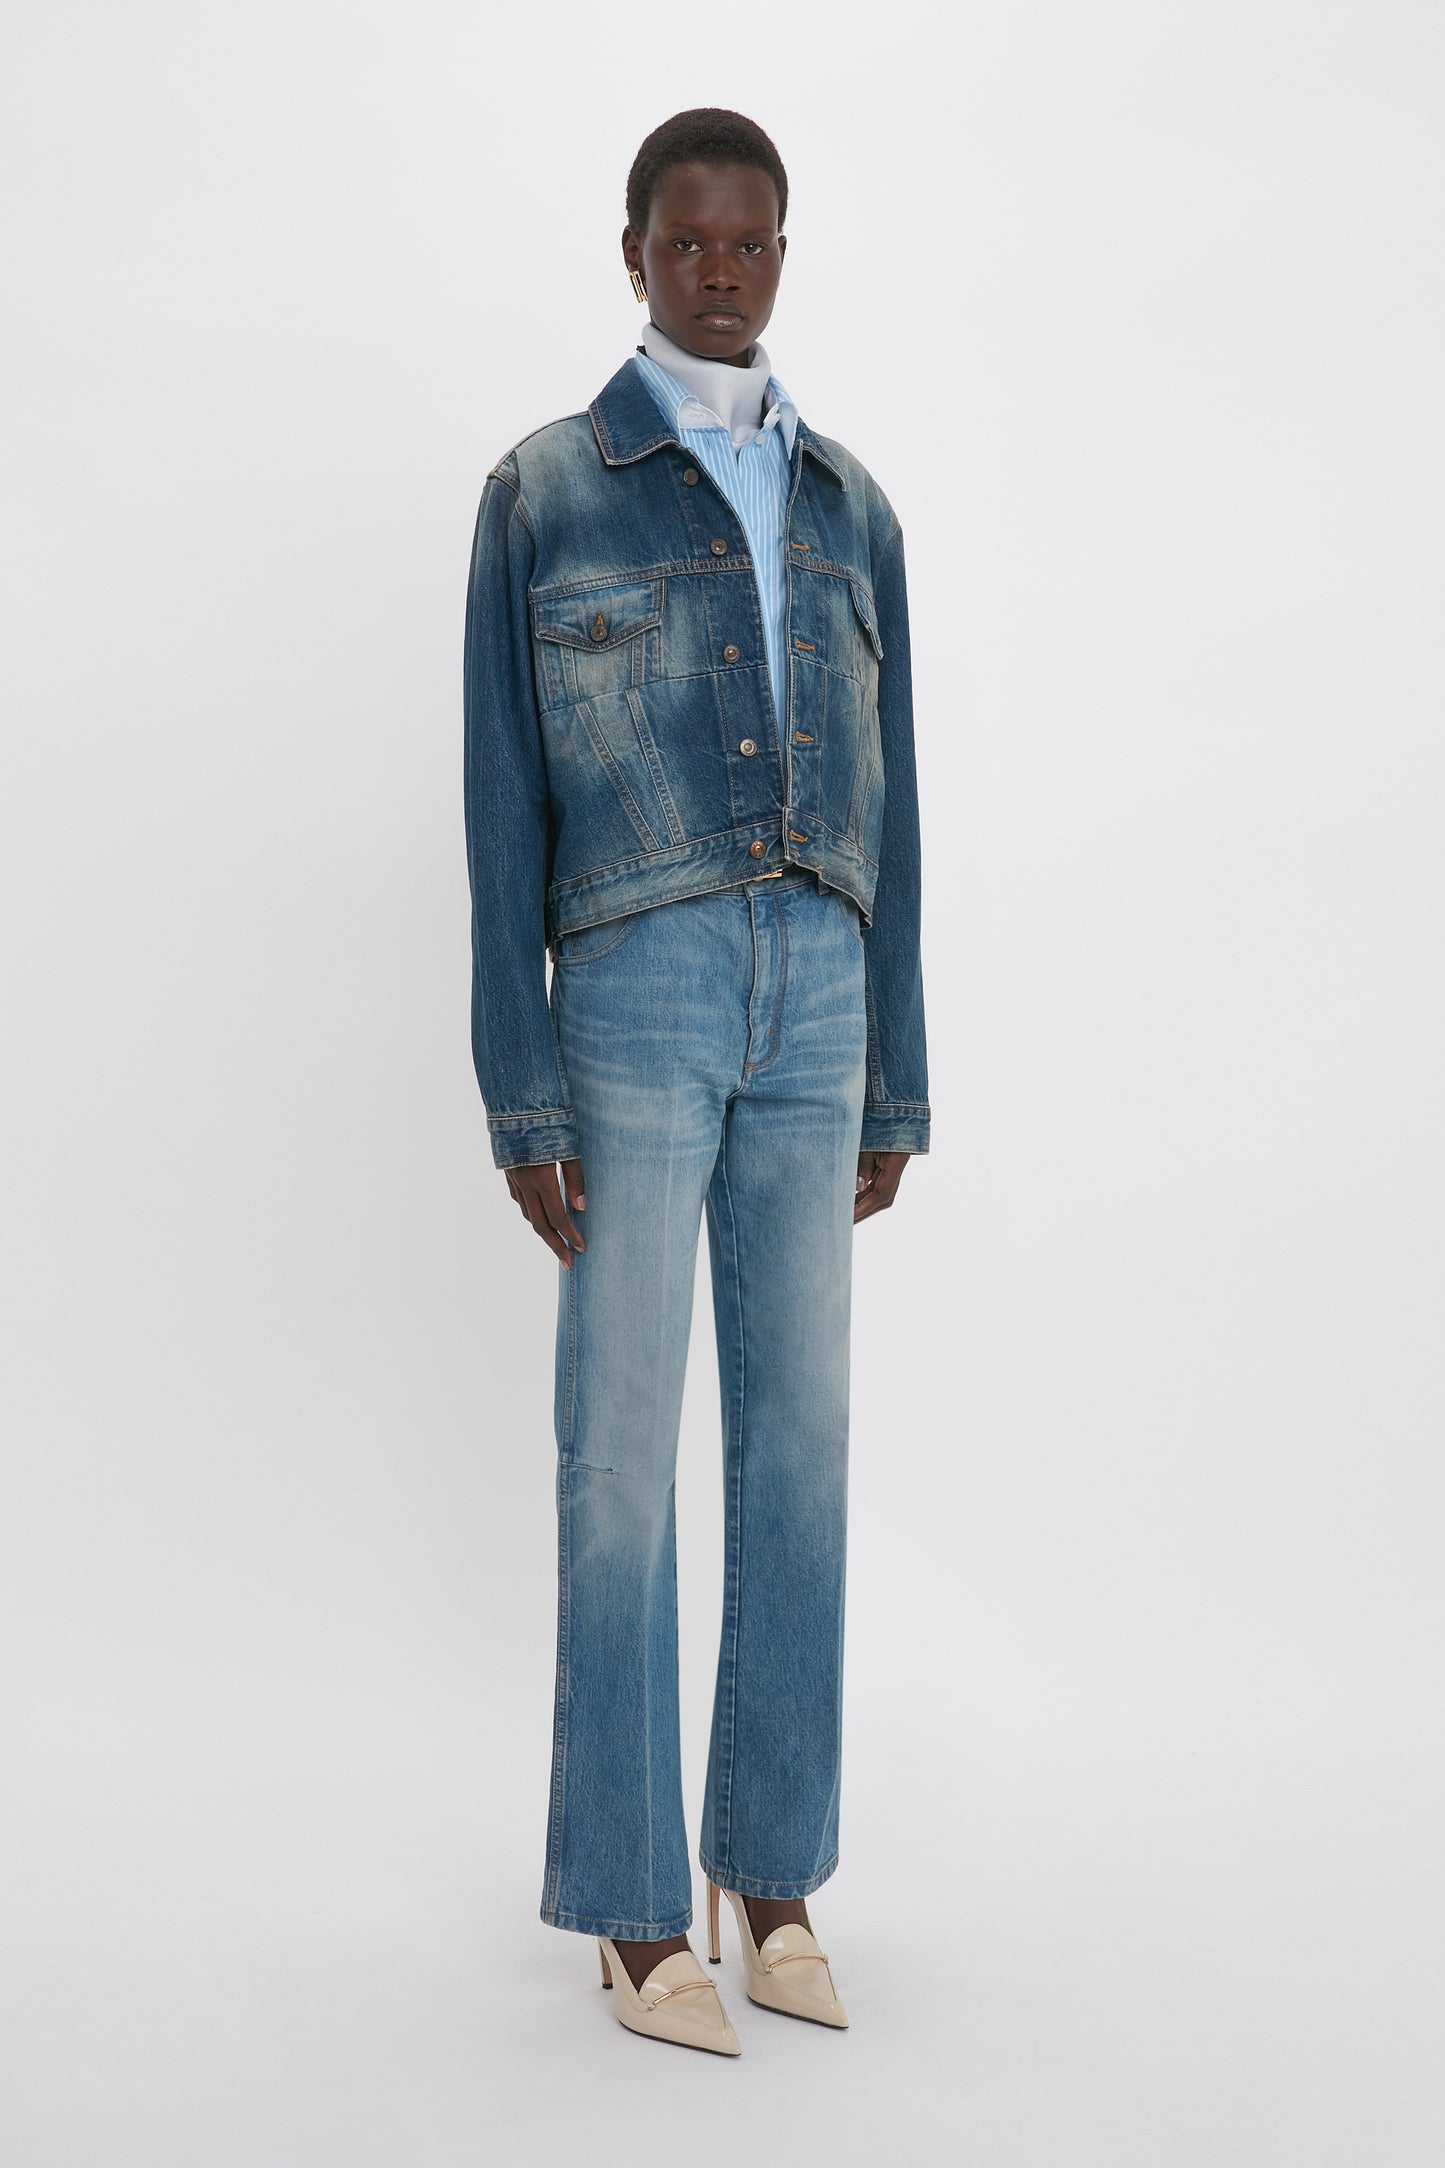 A person stands against a plain background, wearing a denim jacket with deconstructed detailing and 100% cotton Relaxed Flared Jean In Broken Vintage Wash from Victoria Beckham paired with a blue collared shirt underneath and light-colored shoes.